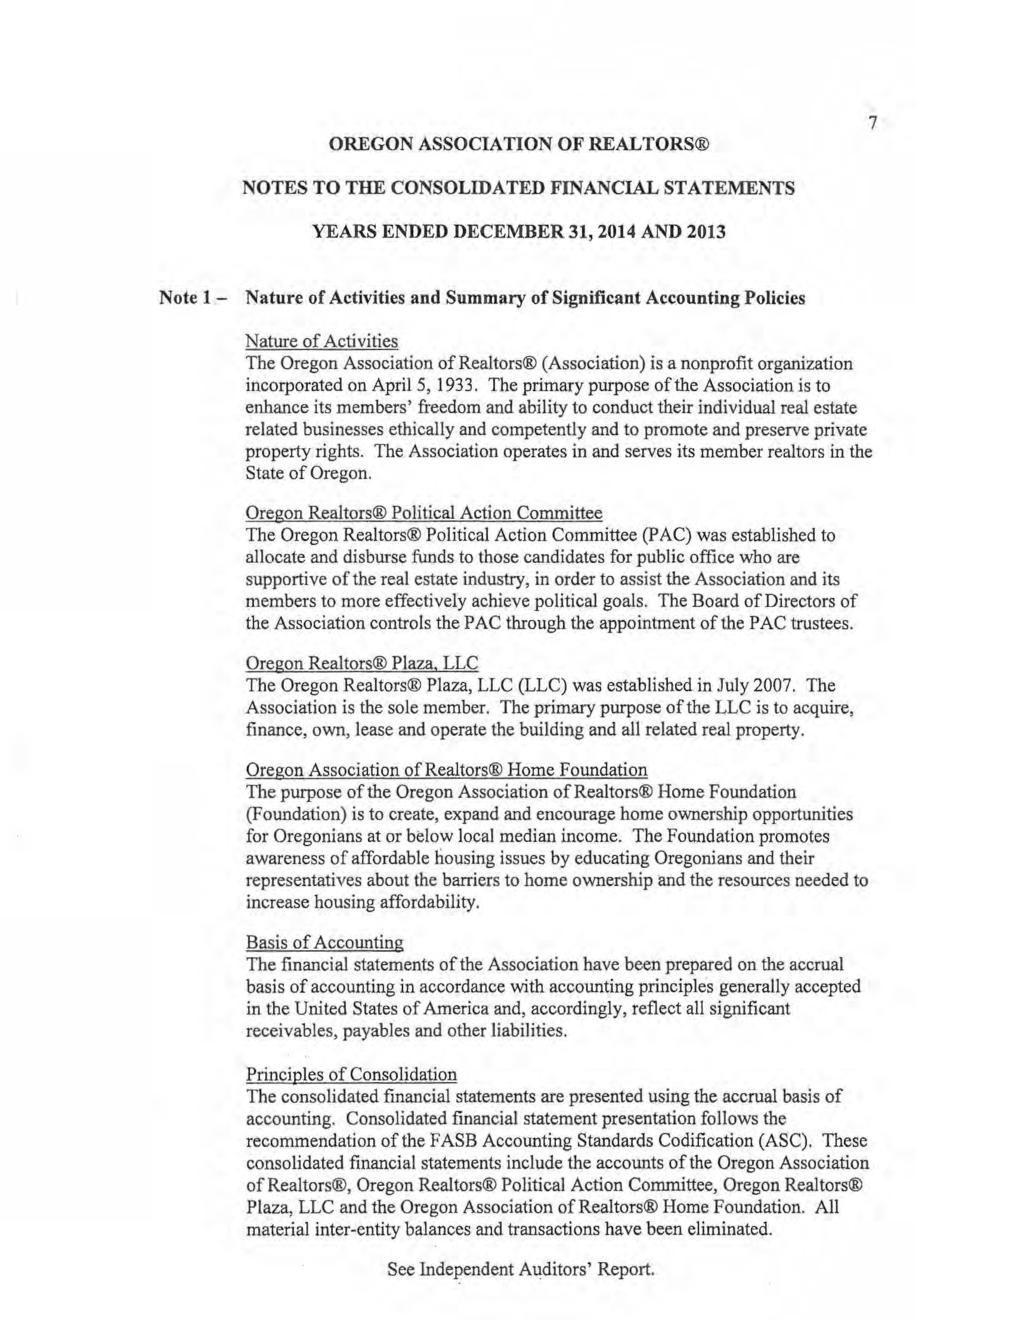 OREGON ASSOCIATION OF REALTORS 7 NOTES TO THE CONSOLIDATED FINANCIAL STATEMENTS YEARS ENDED DECEMBER 31, 2014 AND 2013 Note 1- Nature of Activities and Summary of Significant Accounting Policies